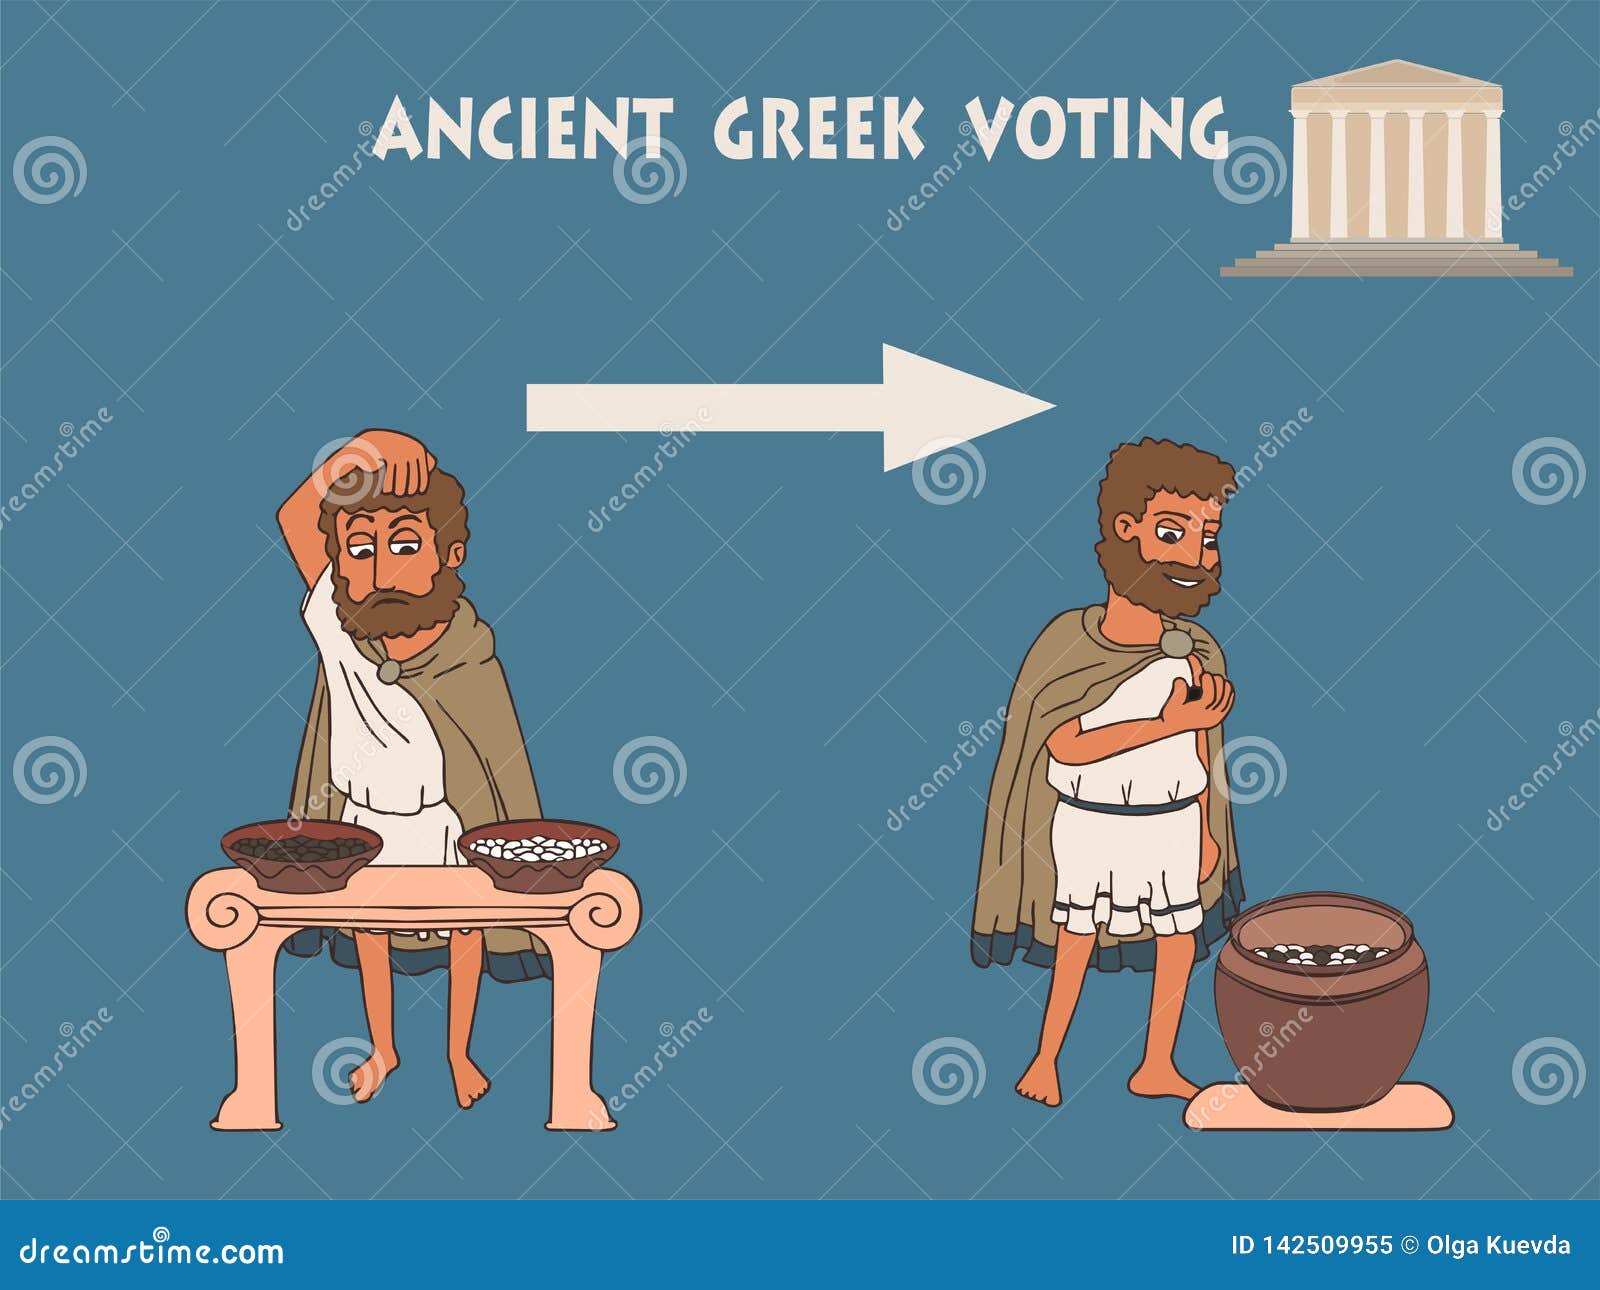 Election Process in Ancient Greece Cartoon Stock Vector - Illustration of  voting, culture: 142509955